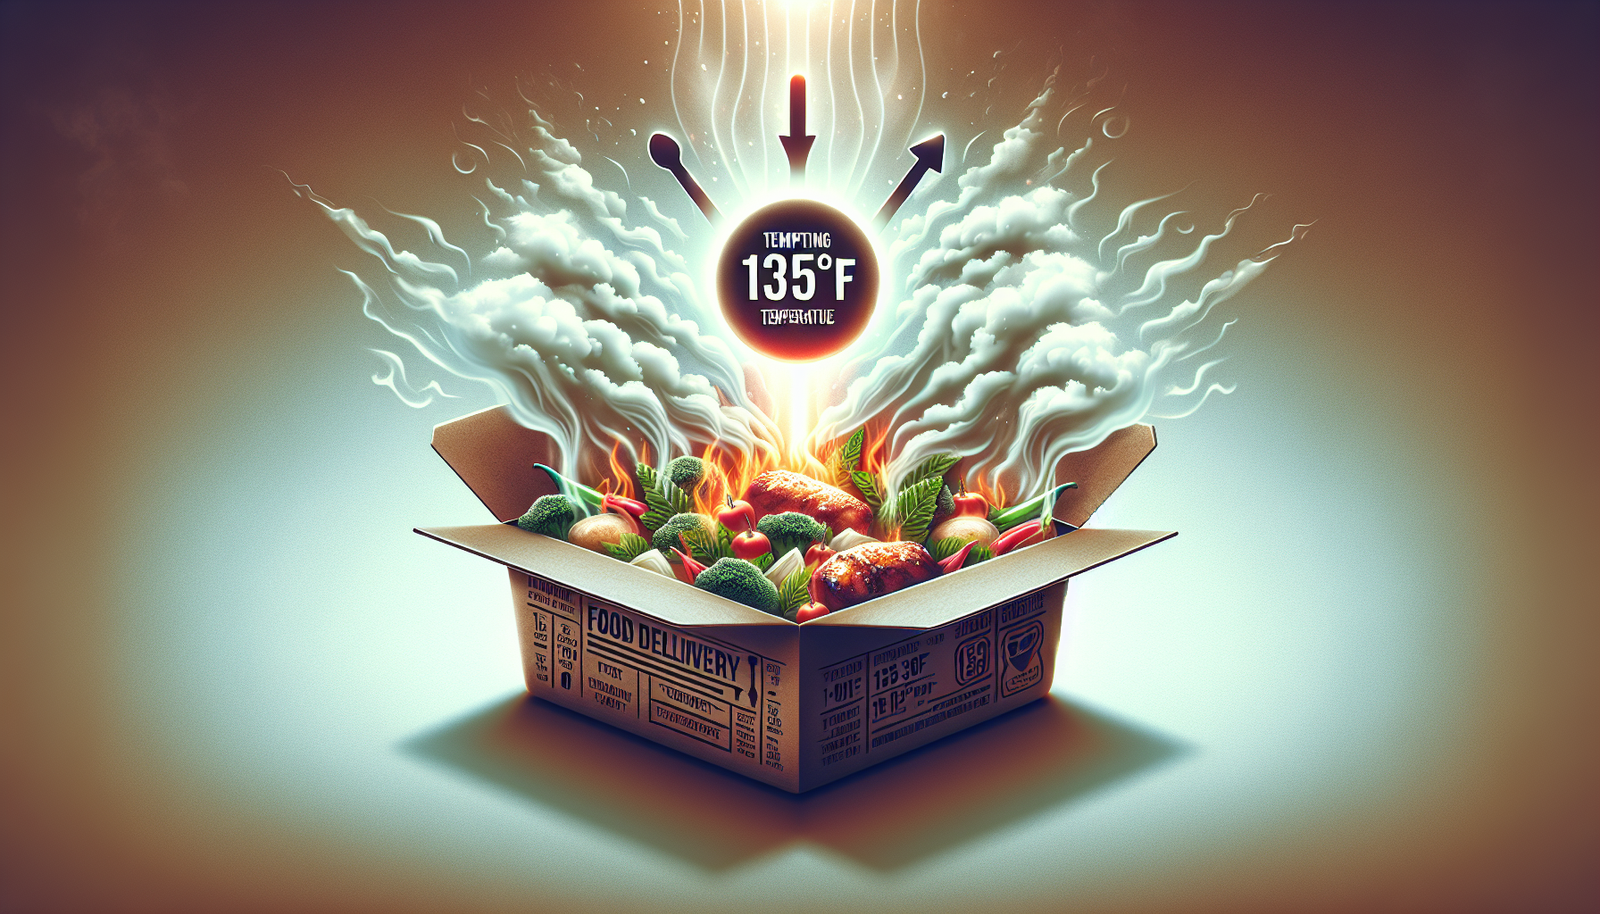 Which Food Items Should Be Delivered At 135 F?